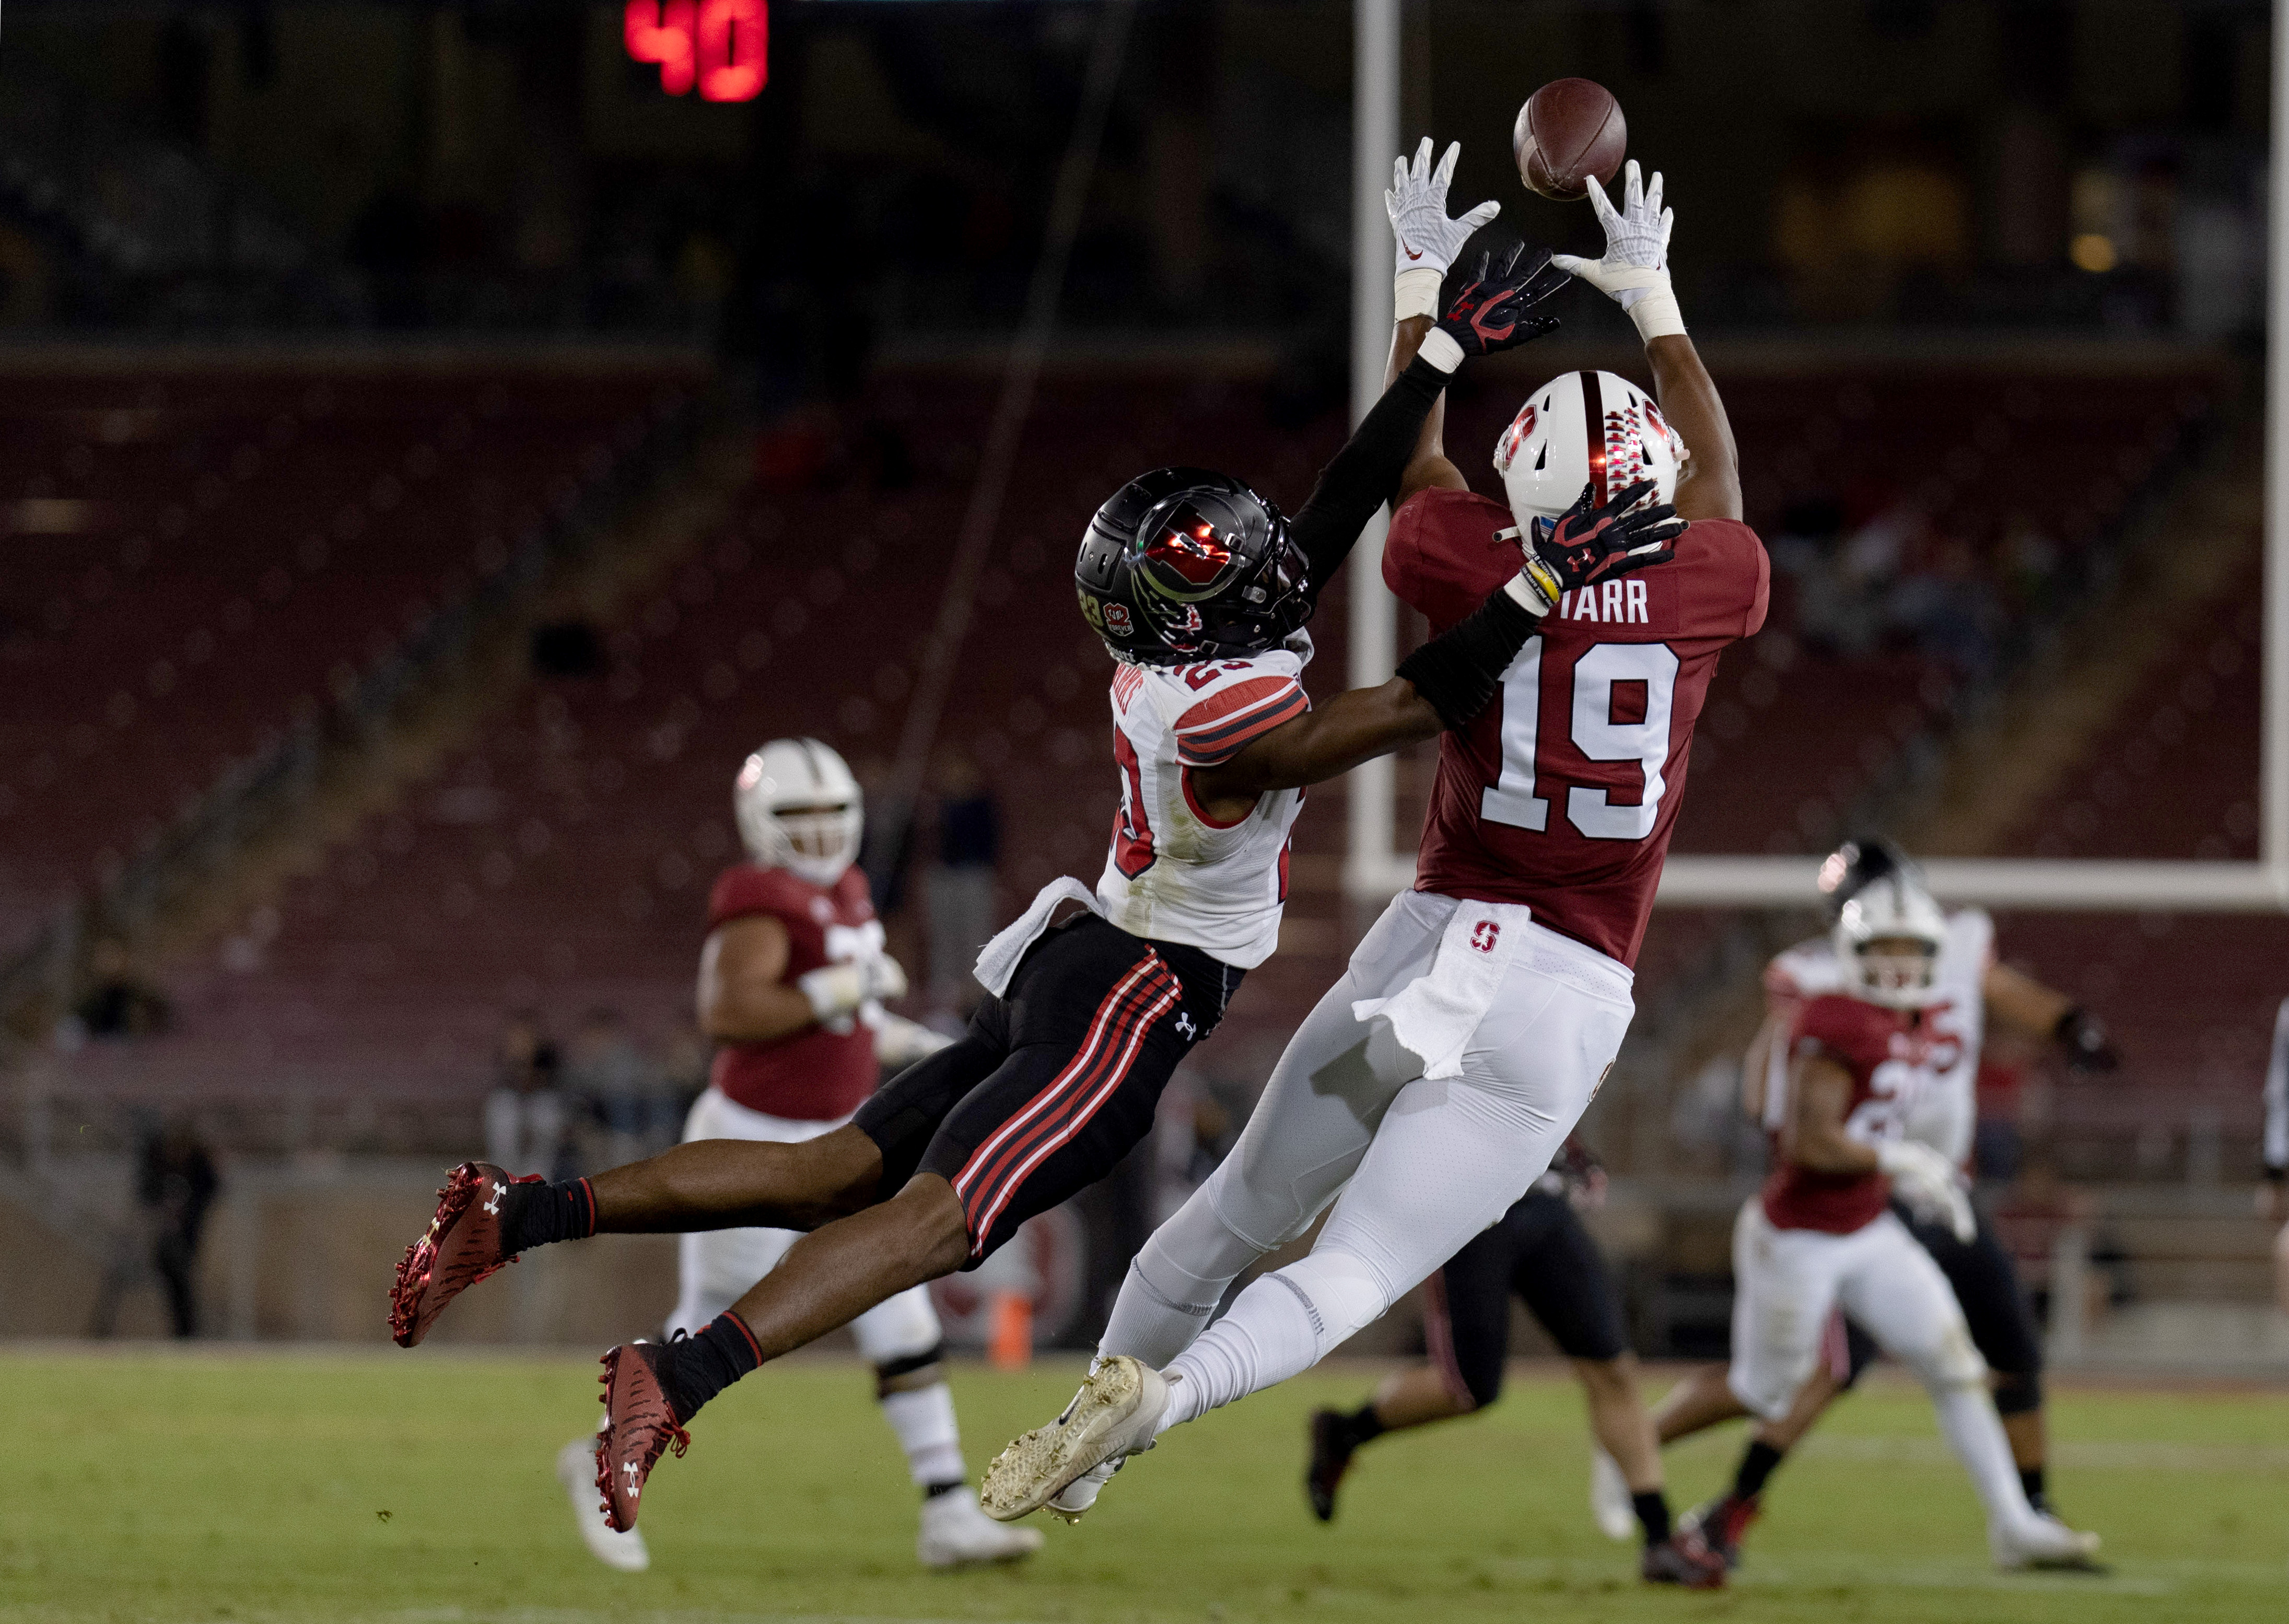 Nov 5, 2021; Stanford, California, USA; Utah Utes cornerback Faybian Marks (23) attempts to defend against Stanford Cardinal wide receiver Silas Starr (19) during the fourth quarter at Stanford Stadium. Mandatory Credit: Stan Szeto-USA TODAY Sports